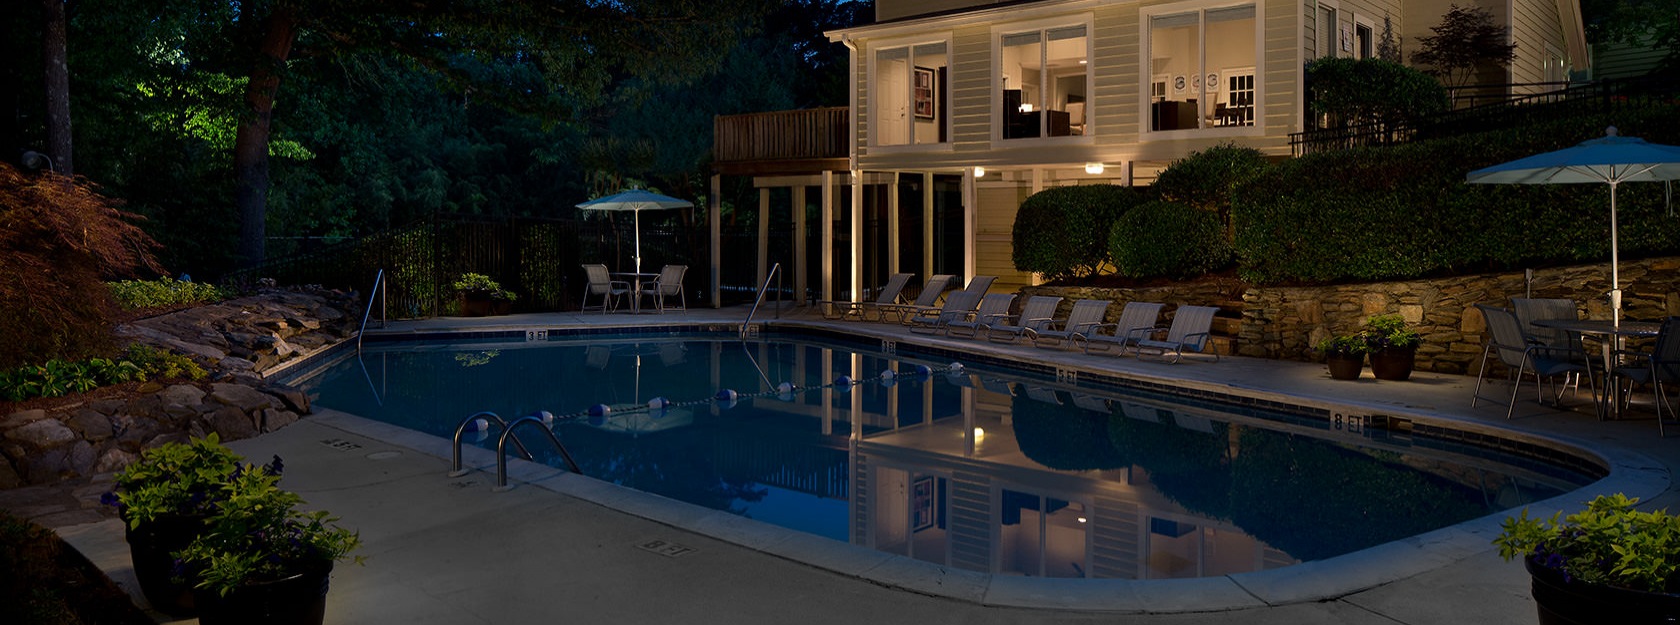 outdoor swimming pool at night